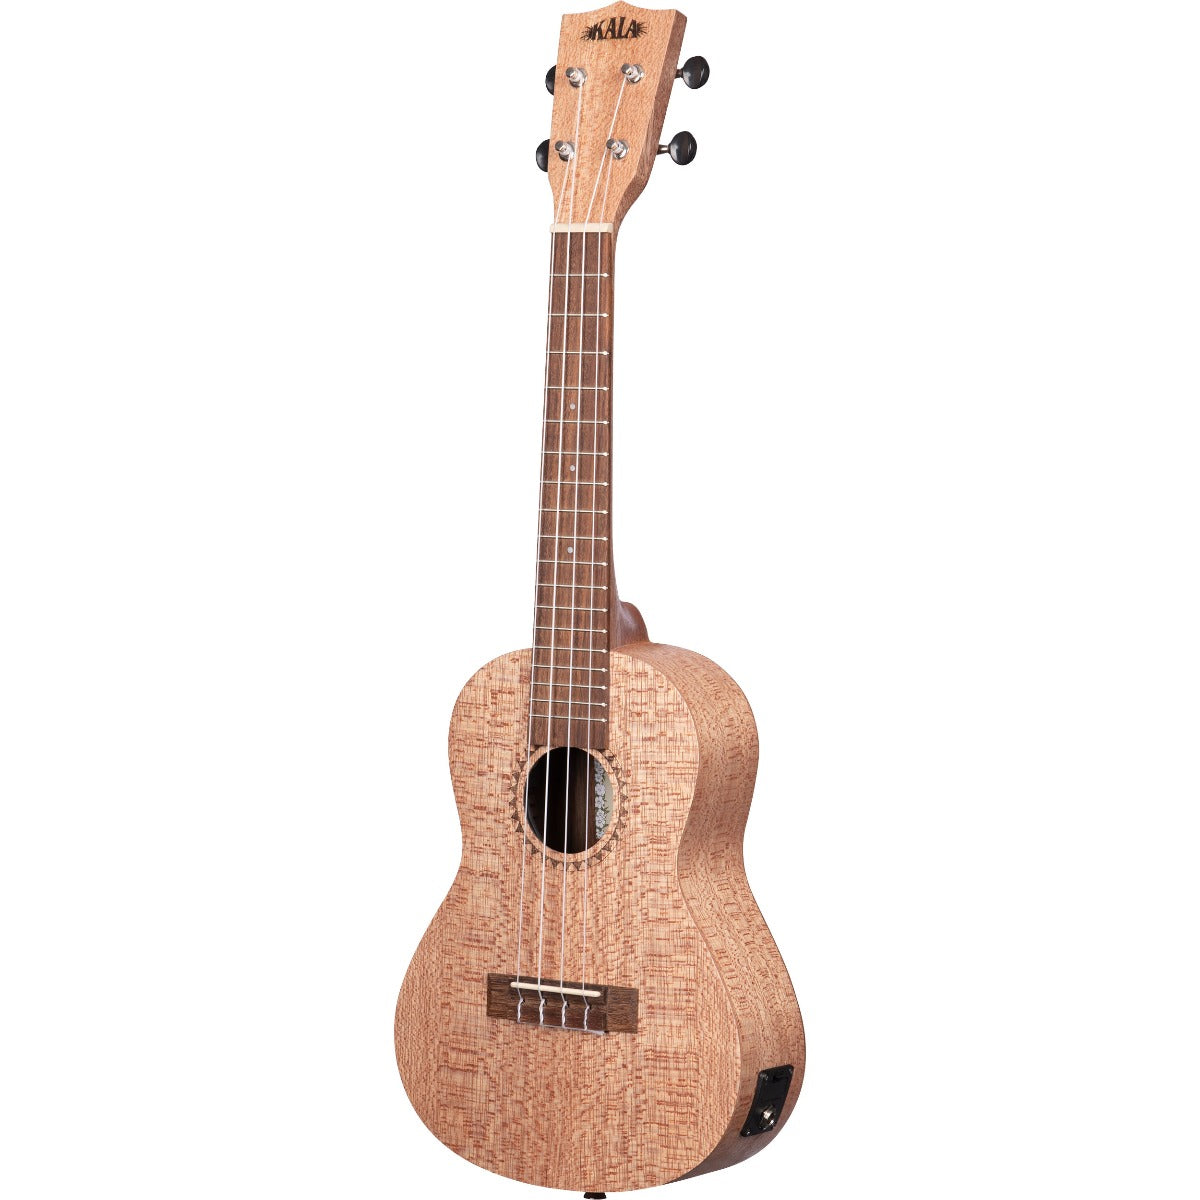 Perspective view of Kala KA-20CE Burled Meranti Ac-El Concert Ukulele showing top and right side